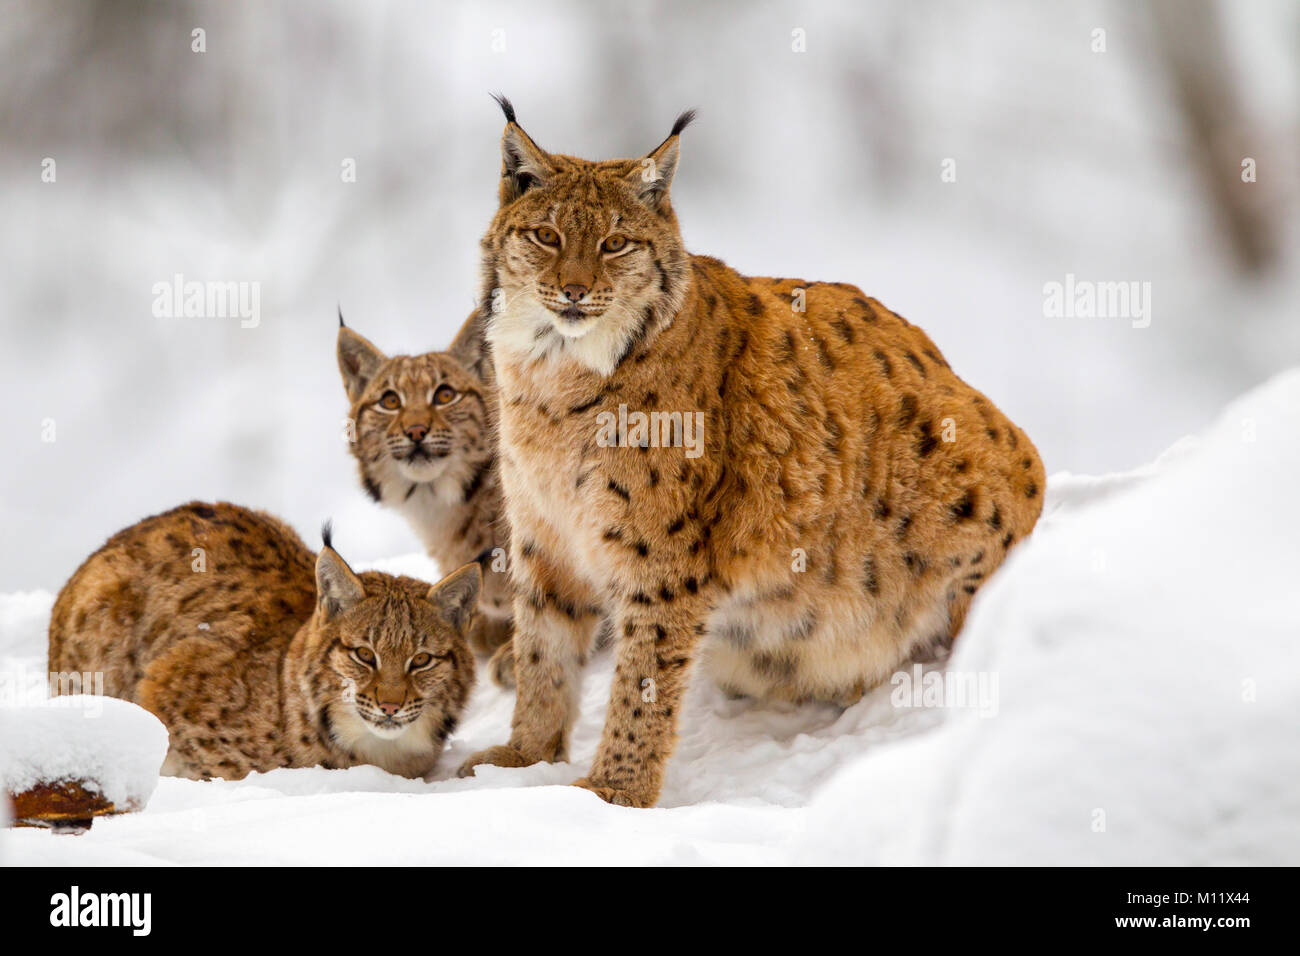 Eurasian lynx (Lynx lynx) family, mother with two kittens, in the snow in the animal enclosure in the Bavarian Forest National Park, Bavaria, Germany. Stock Photo